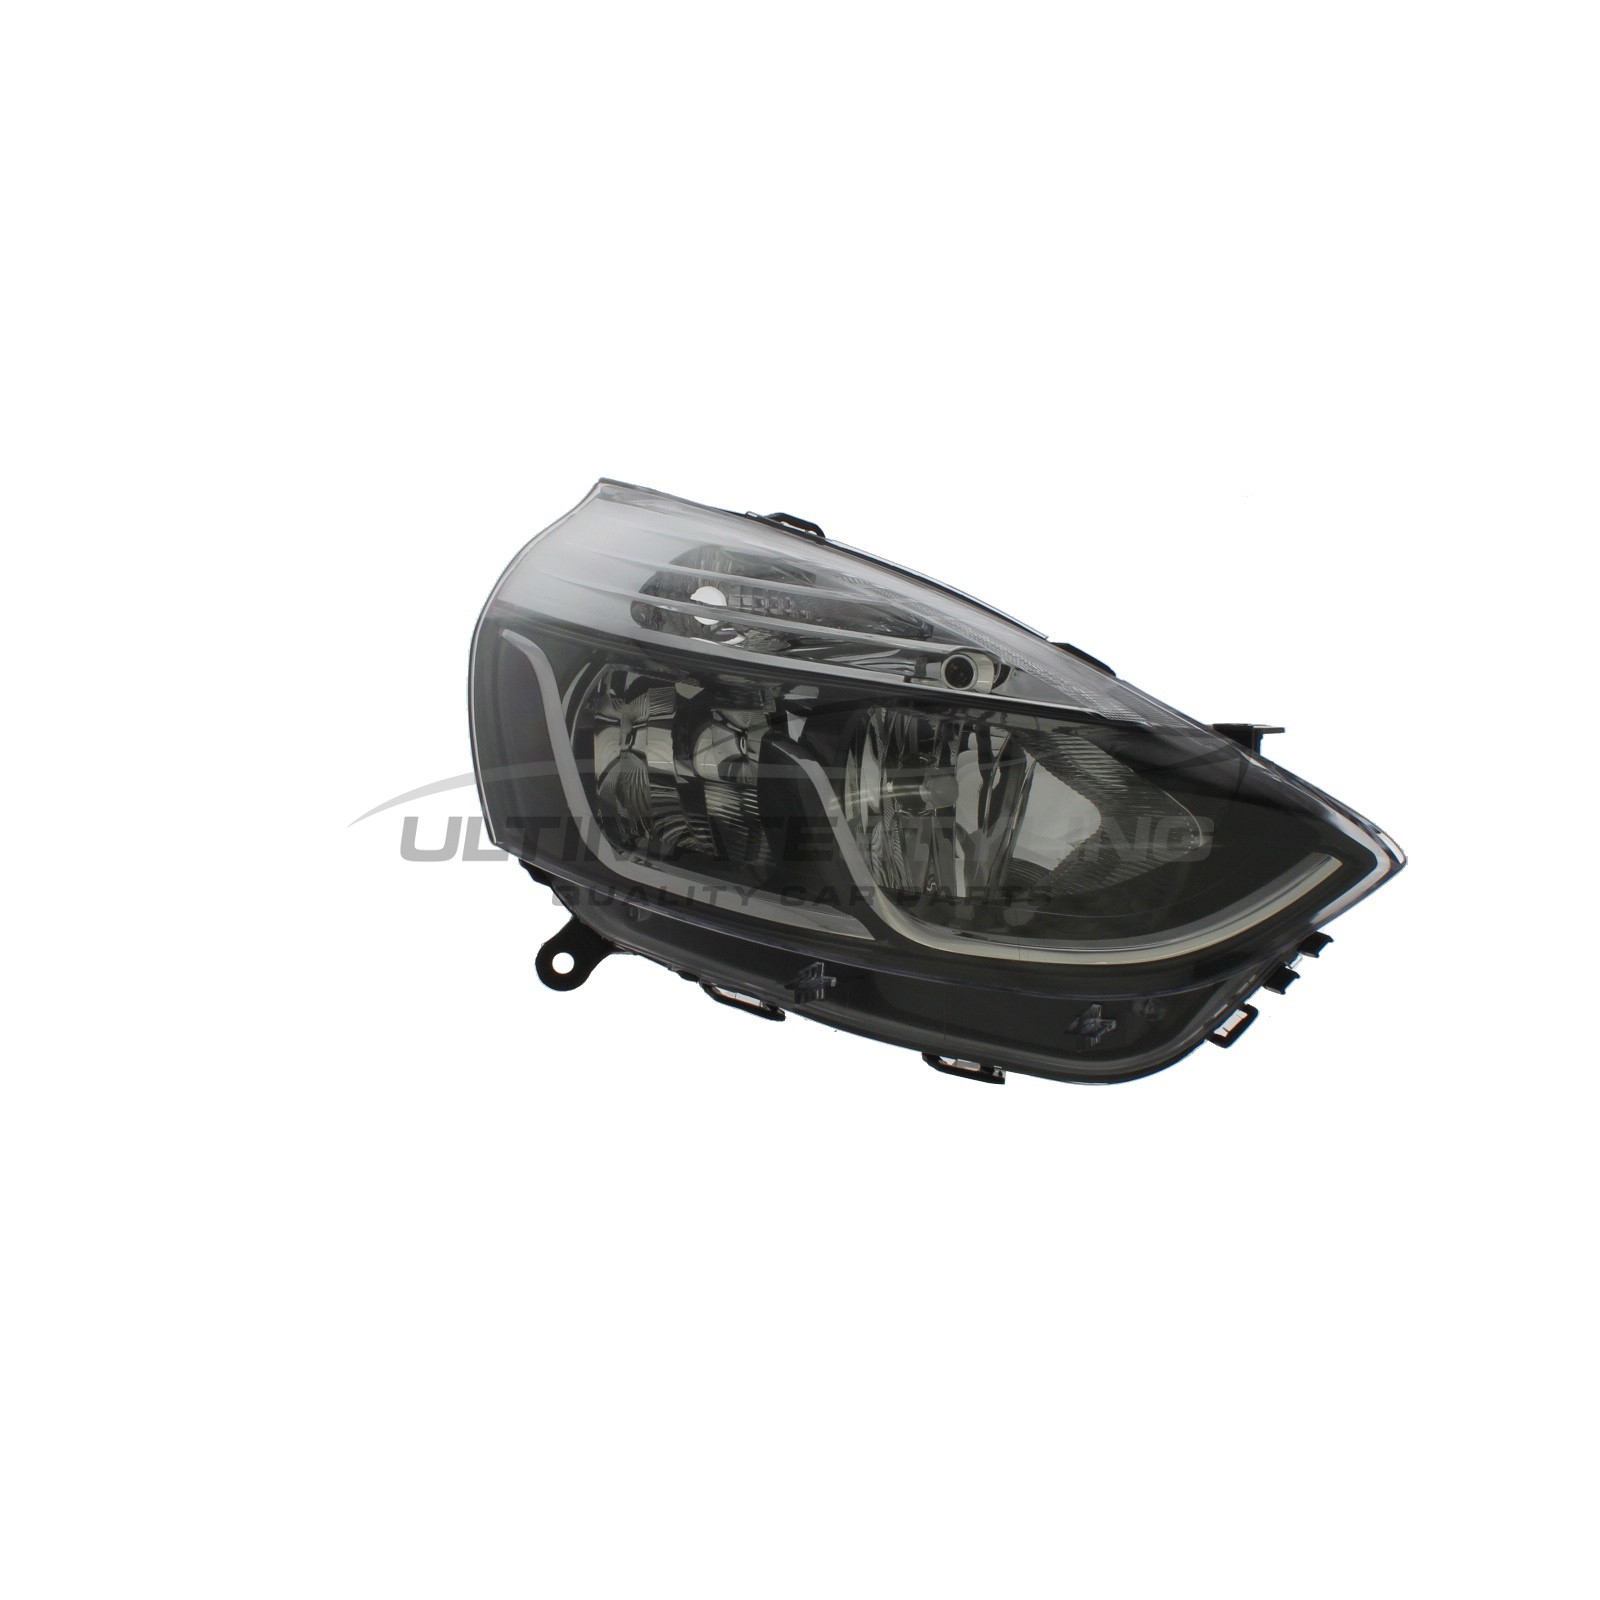 Renault Clio 2012-2016 Halogen, Electric With Motor, Black Headlight / Headlamp with Chrome Edging Drivers Side (RH)